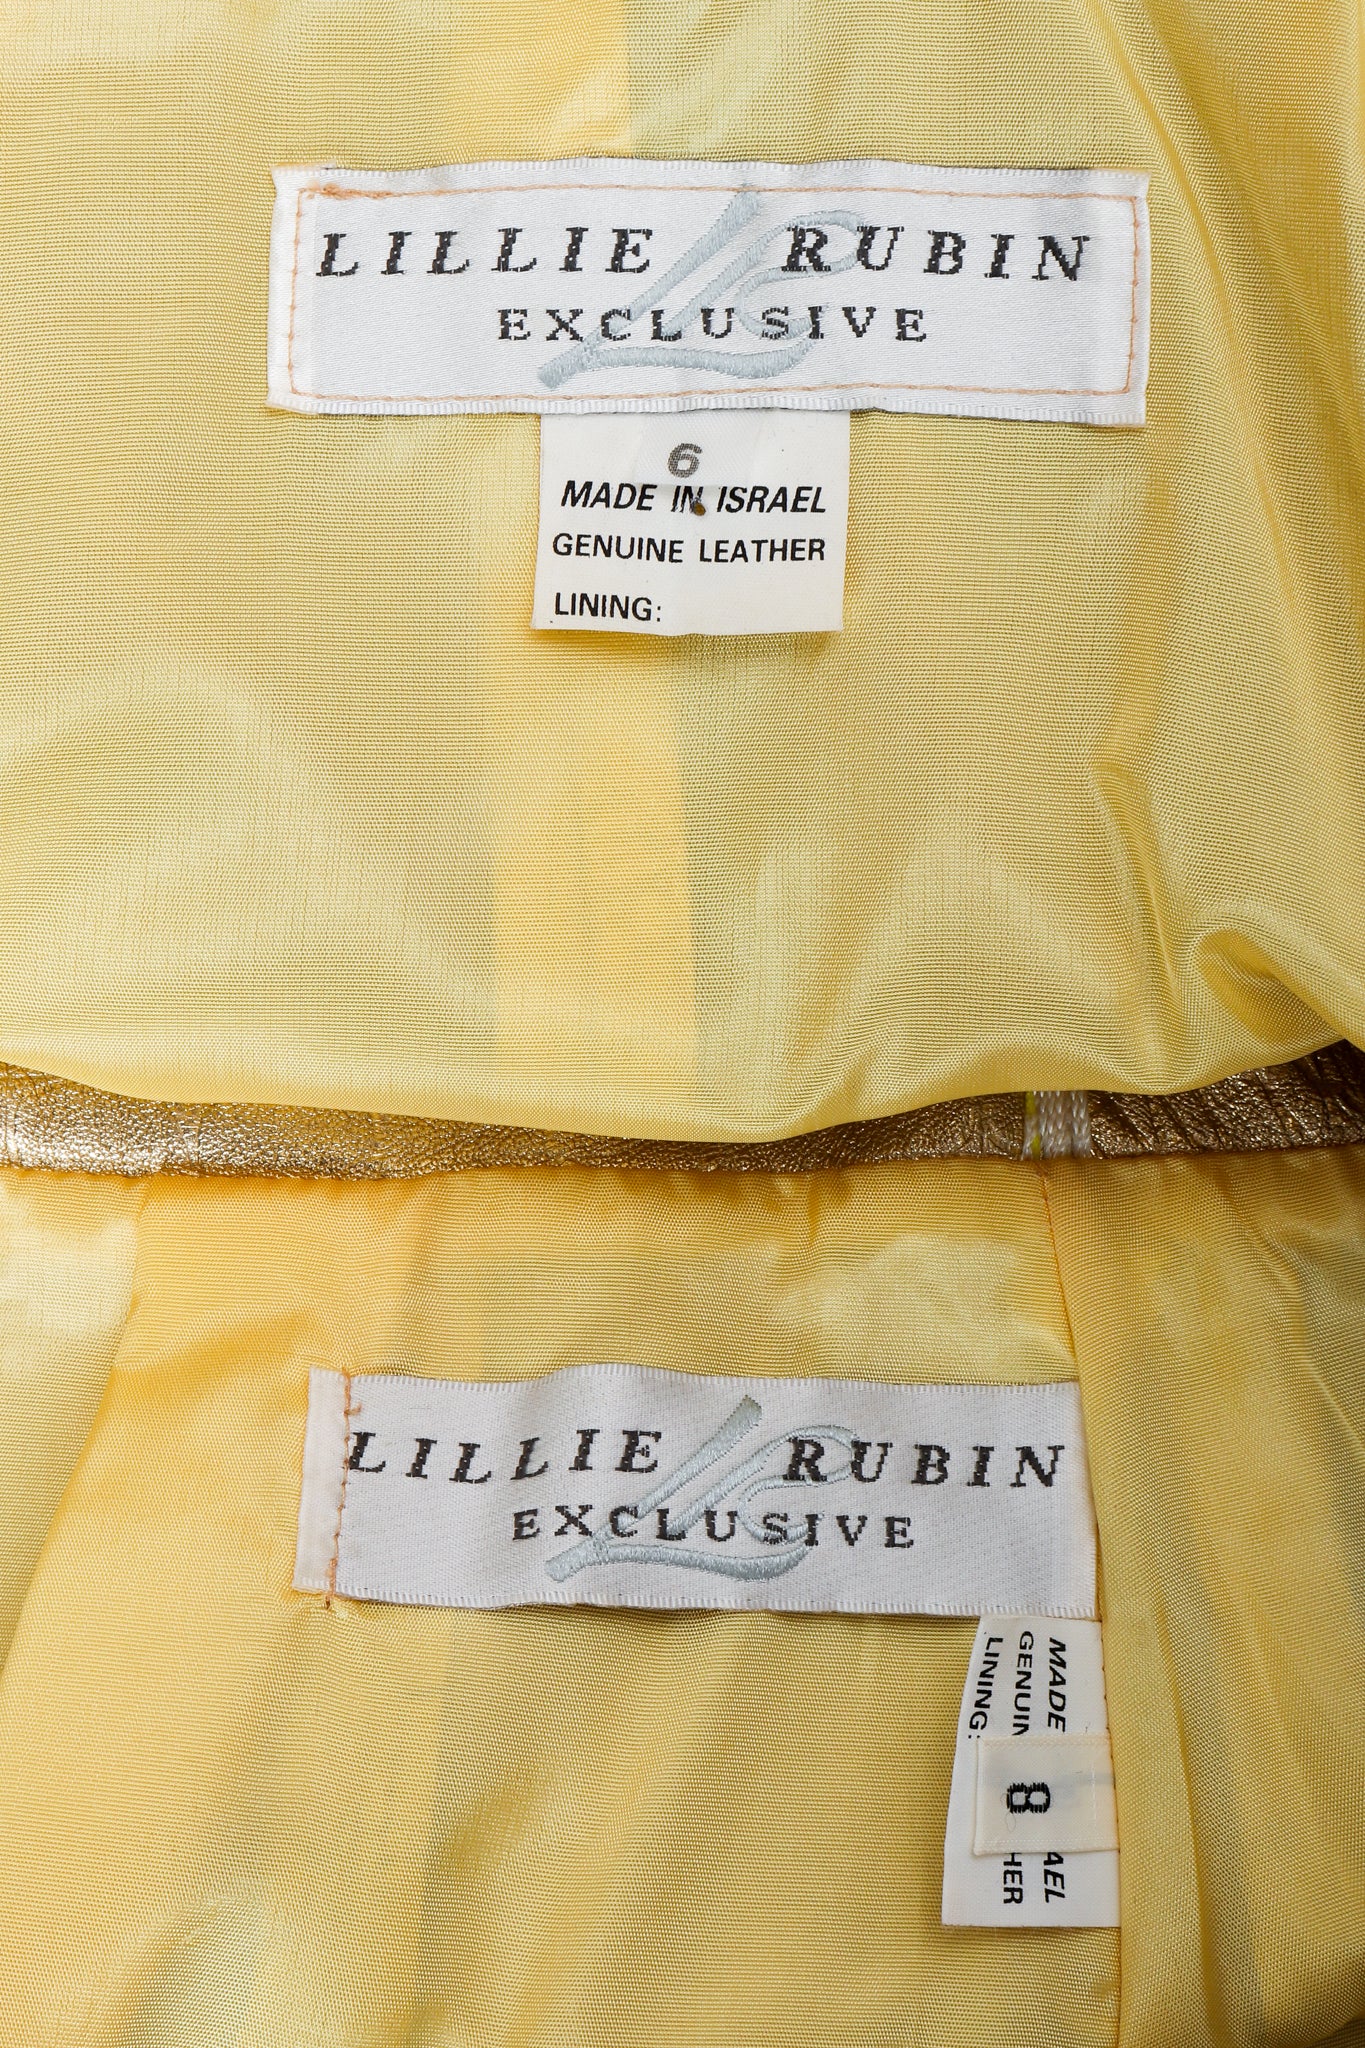 Vintage Lillie Rubin Gold labels on yellow lining fabric